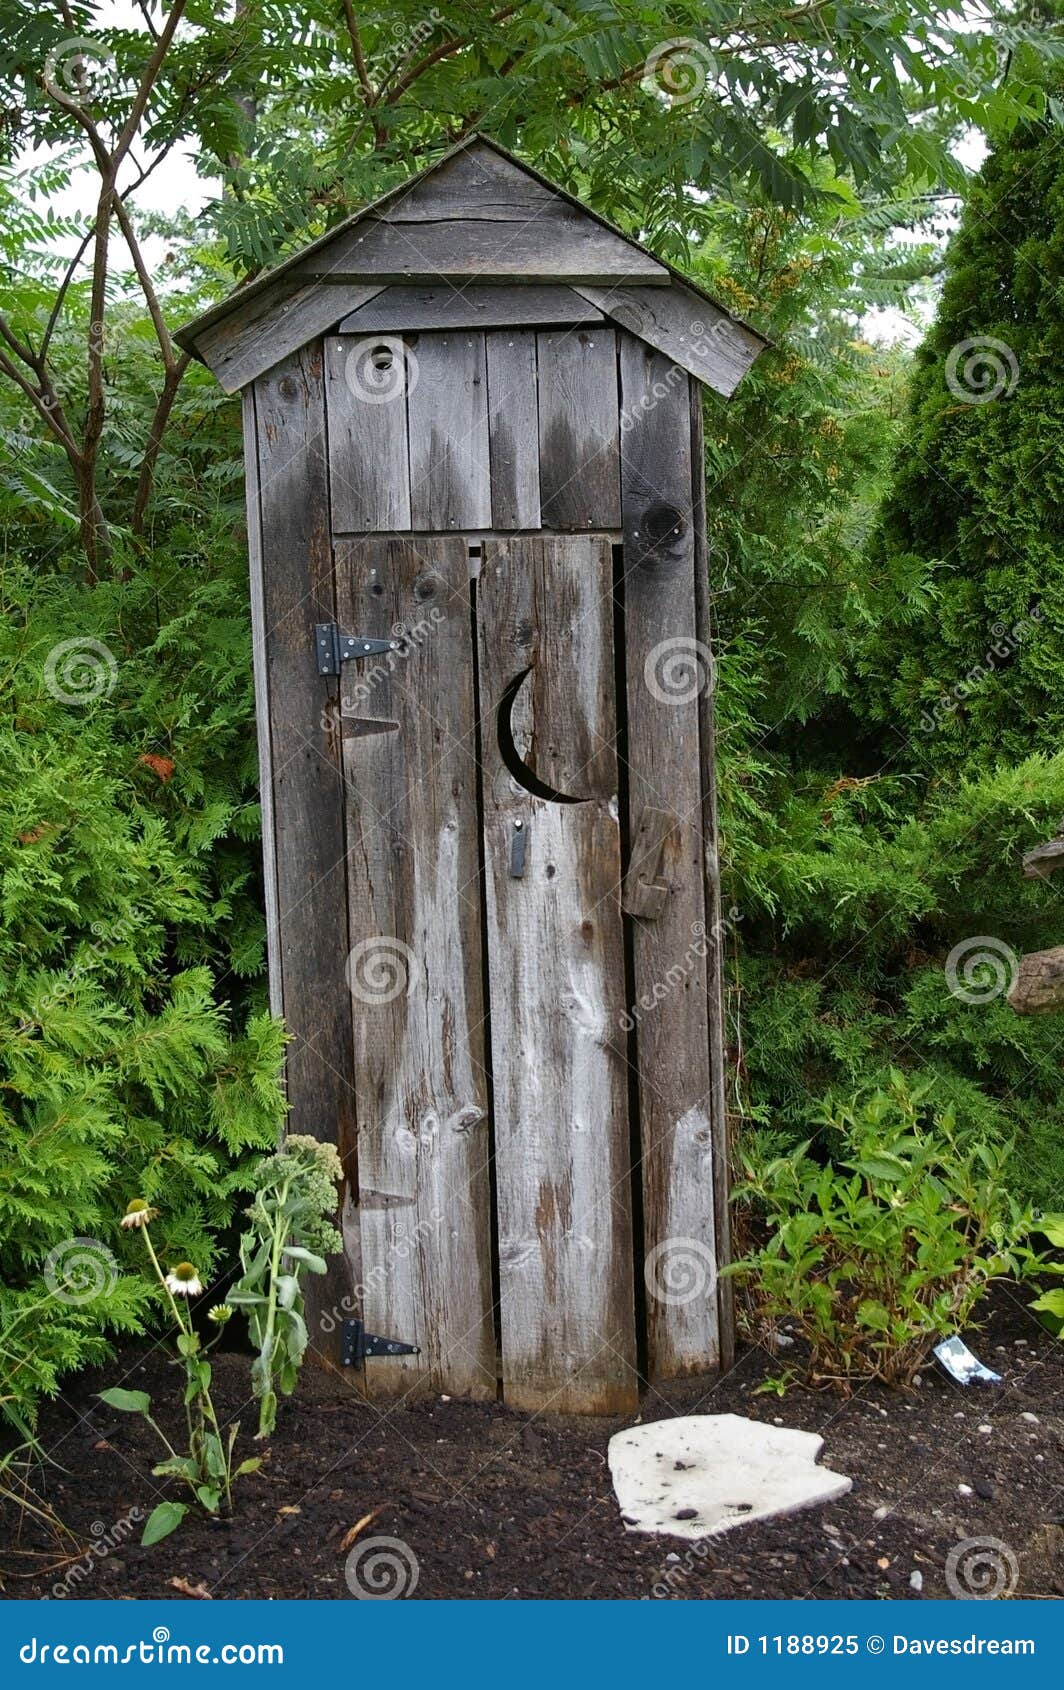 The Outhouse stock image. Image of moon, soil, garden ...